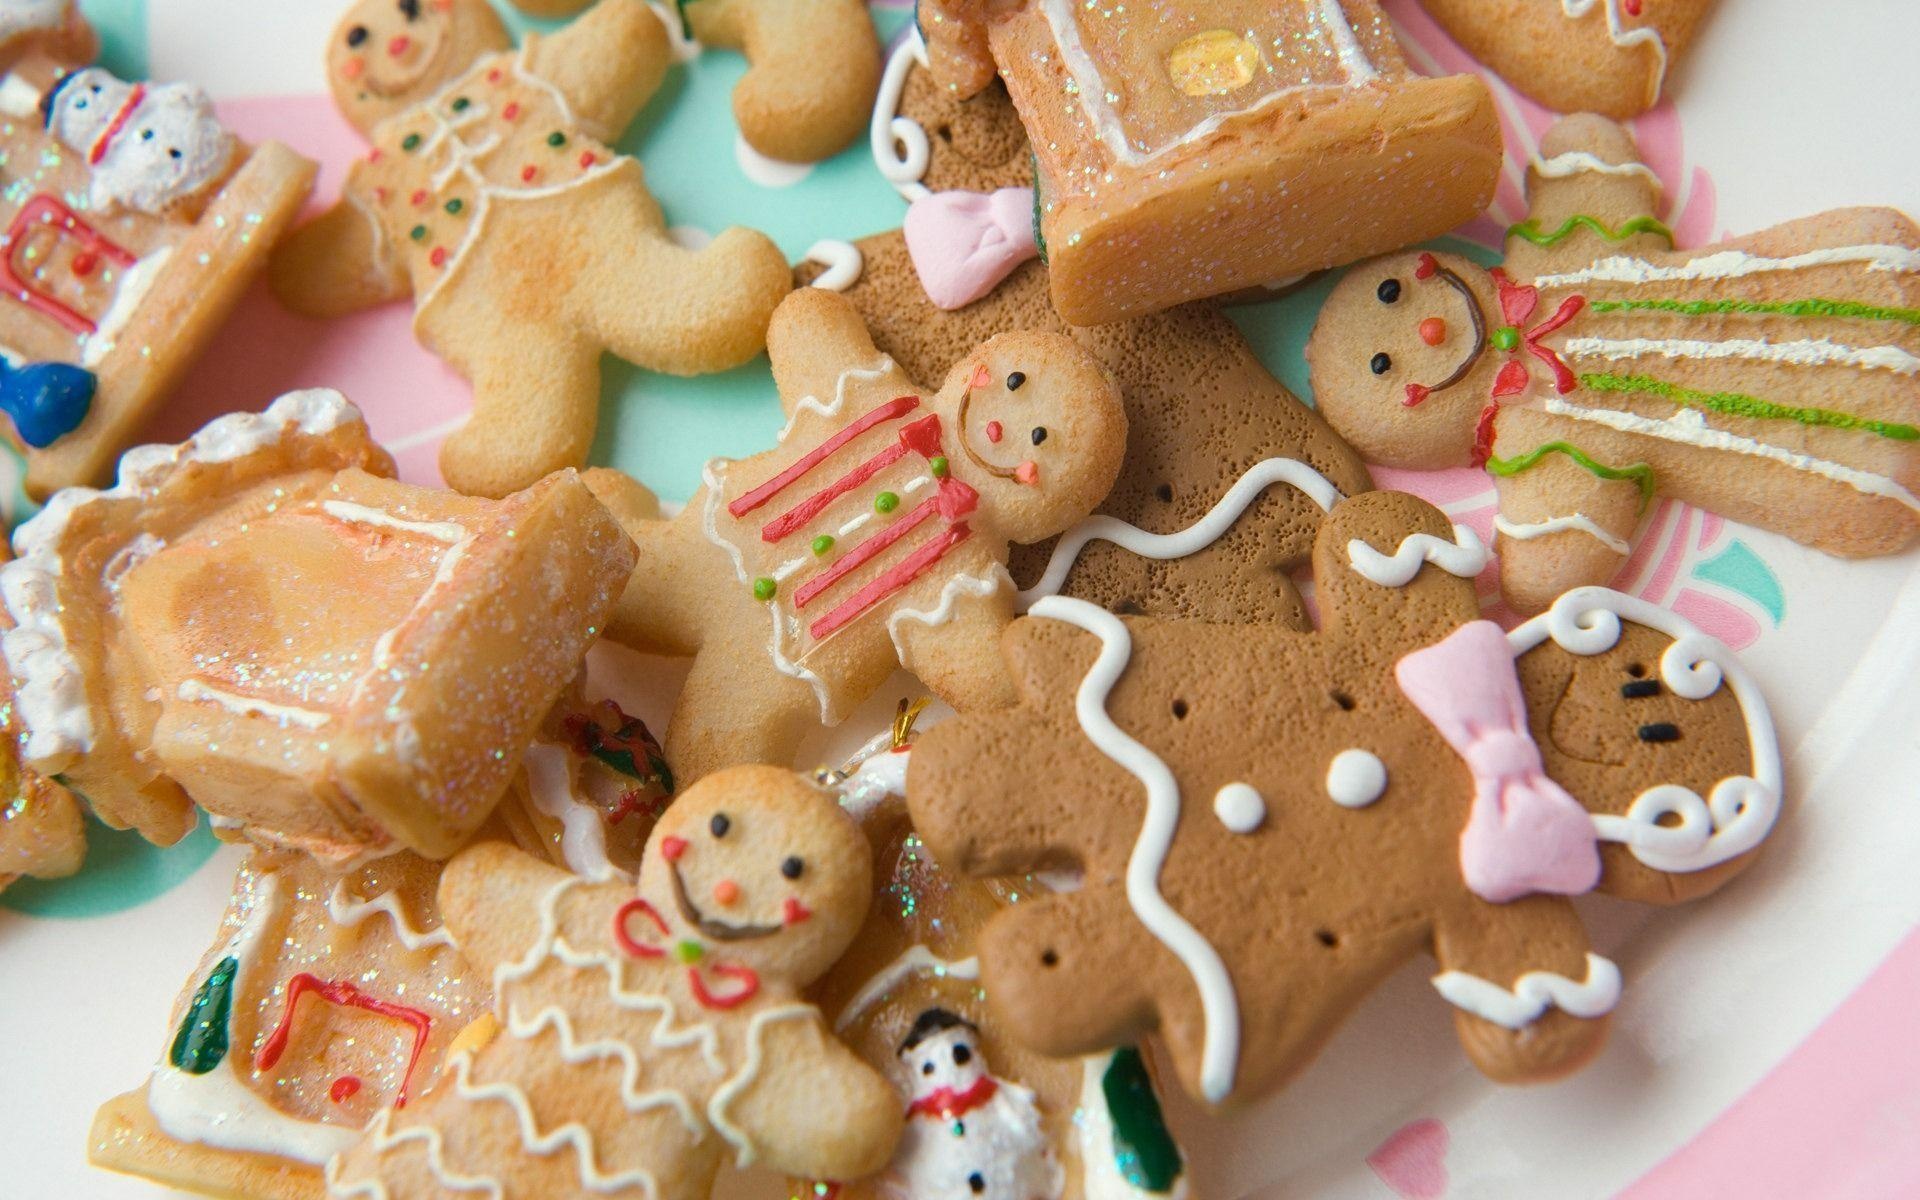 Gingerbread Man, Gingy character, Cute gingerbread cookies, Animated charm, 1920x1200 HD Desktop